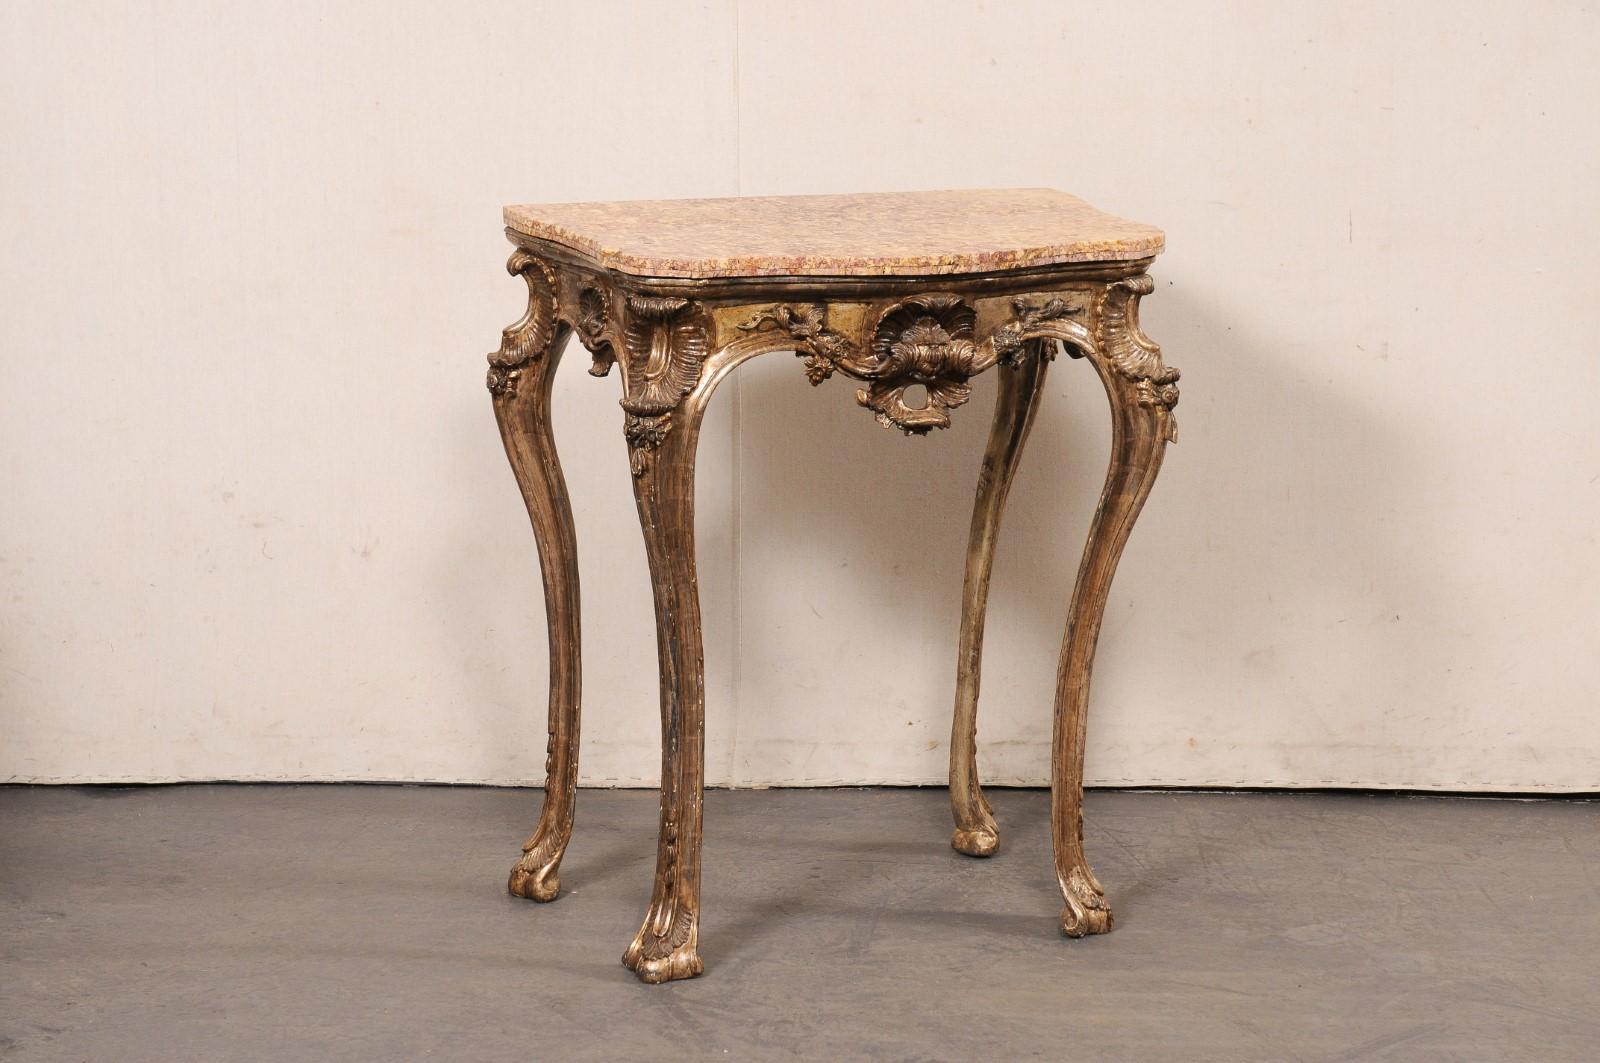 An Italian Rococo smaller-sized carved-wood table, with its original finish and a marble top, from the 18th century. This antique side table from Italy has a beautiful marble top with curvy serpentine front, canted and bowed side corners, and